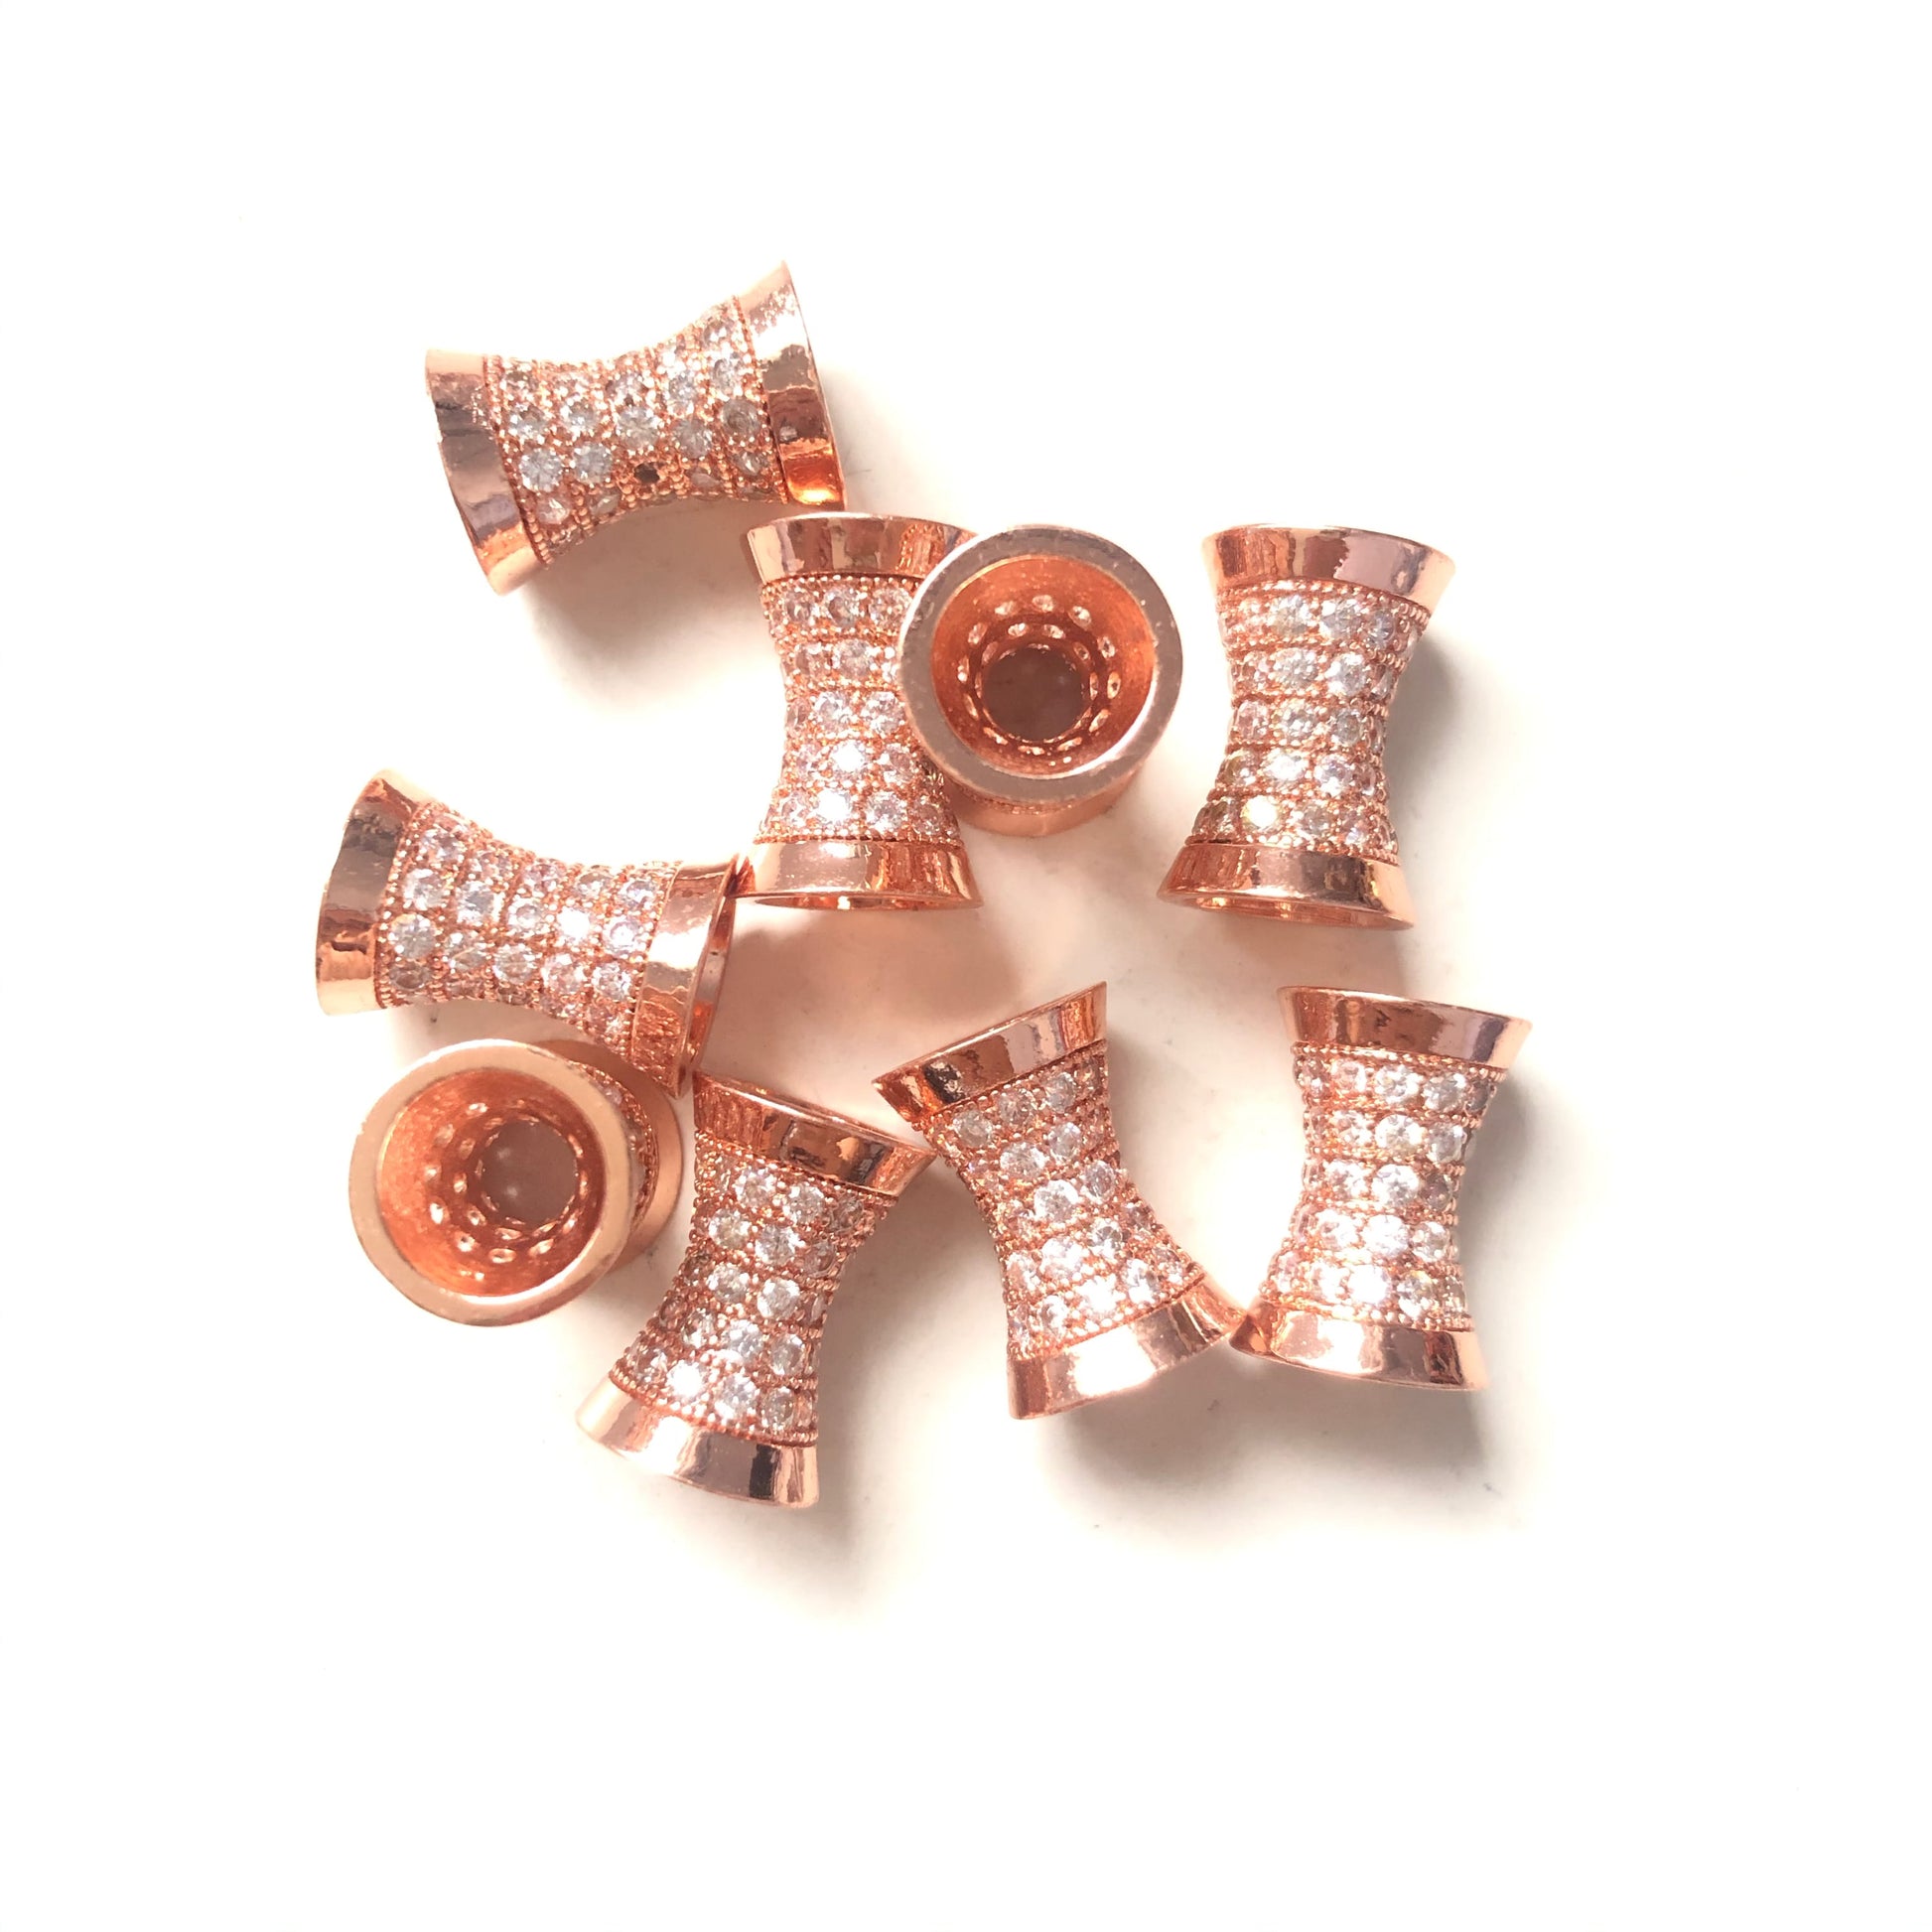 20pcs/lot 13.8*9.7mm CZ Paved Hourglass Spacers Rose Gold CZ Paved Spacers Hourglass Beads Charms Beads Beyond